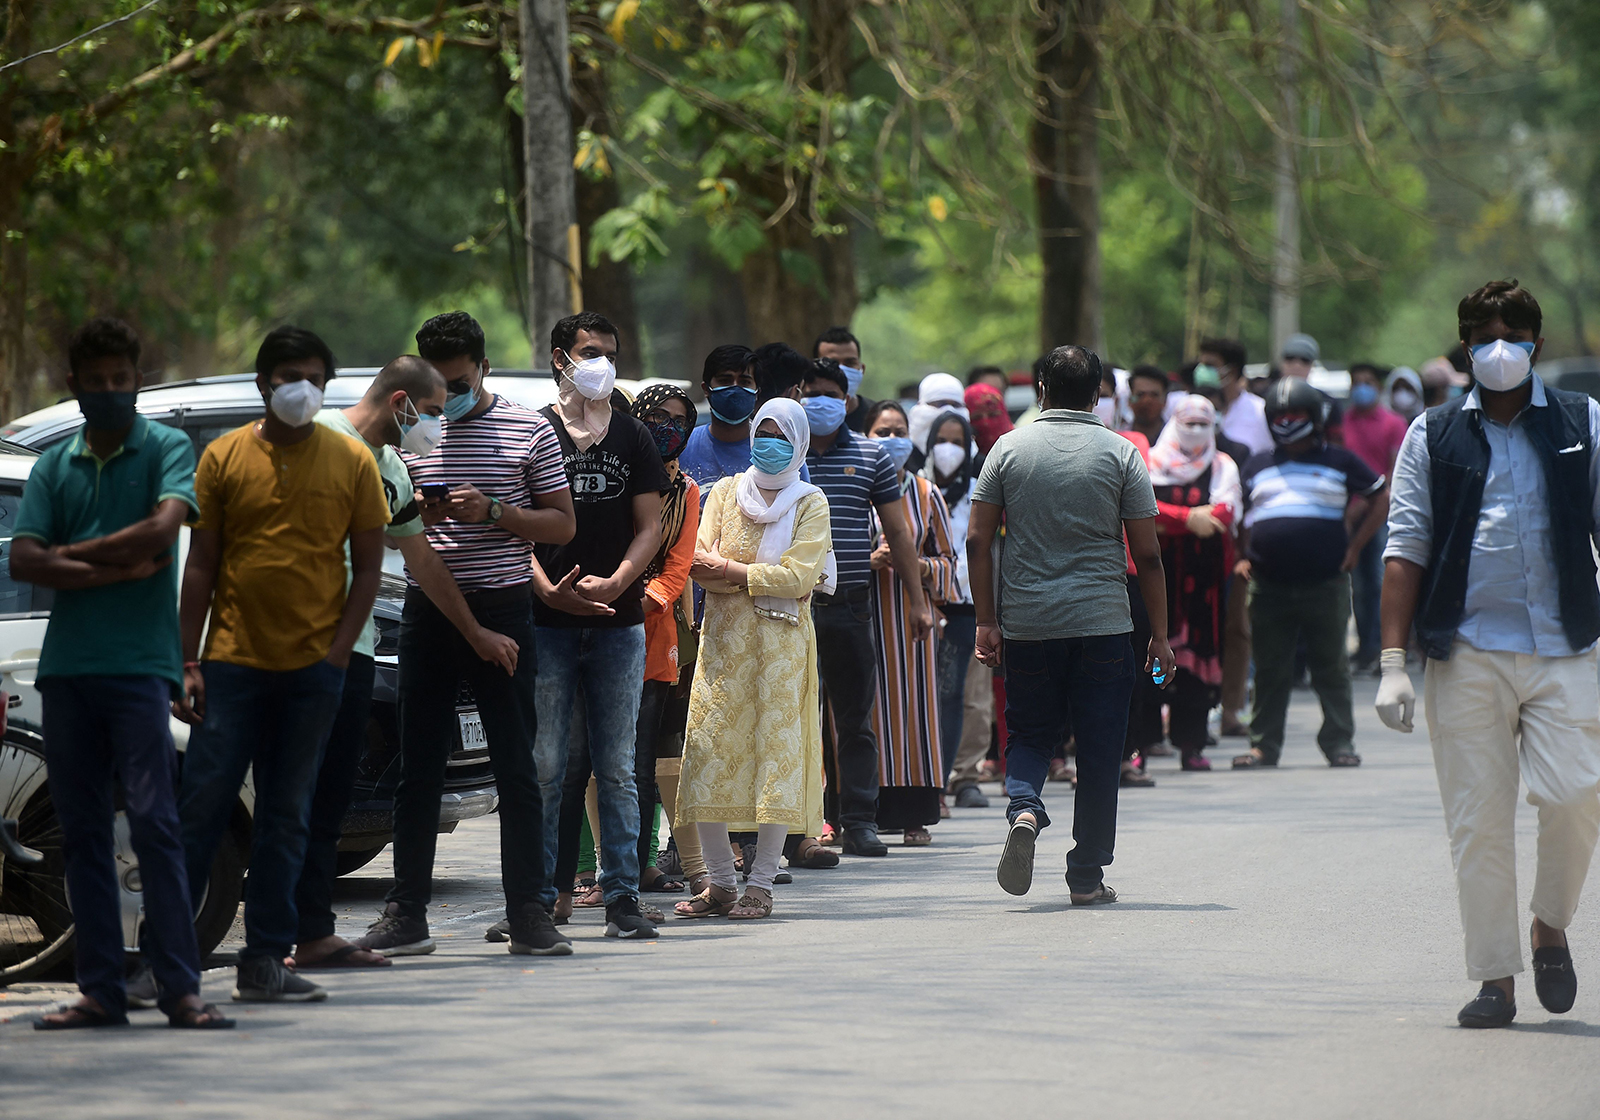 People line up while waiting to receive a dose of the Covishield coronavirus vaccine, outside the Moti Lal Nehru Medical College in Allahabad on May 1.